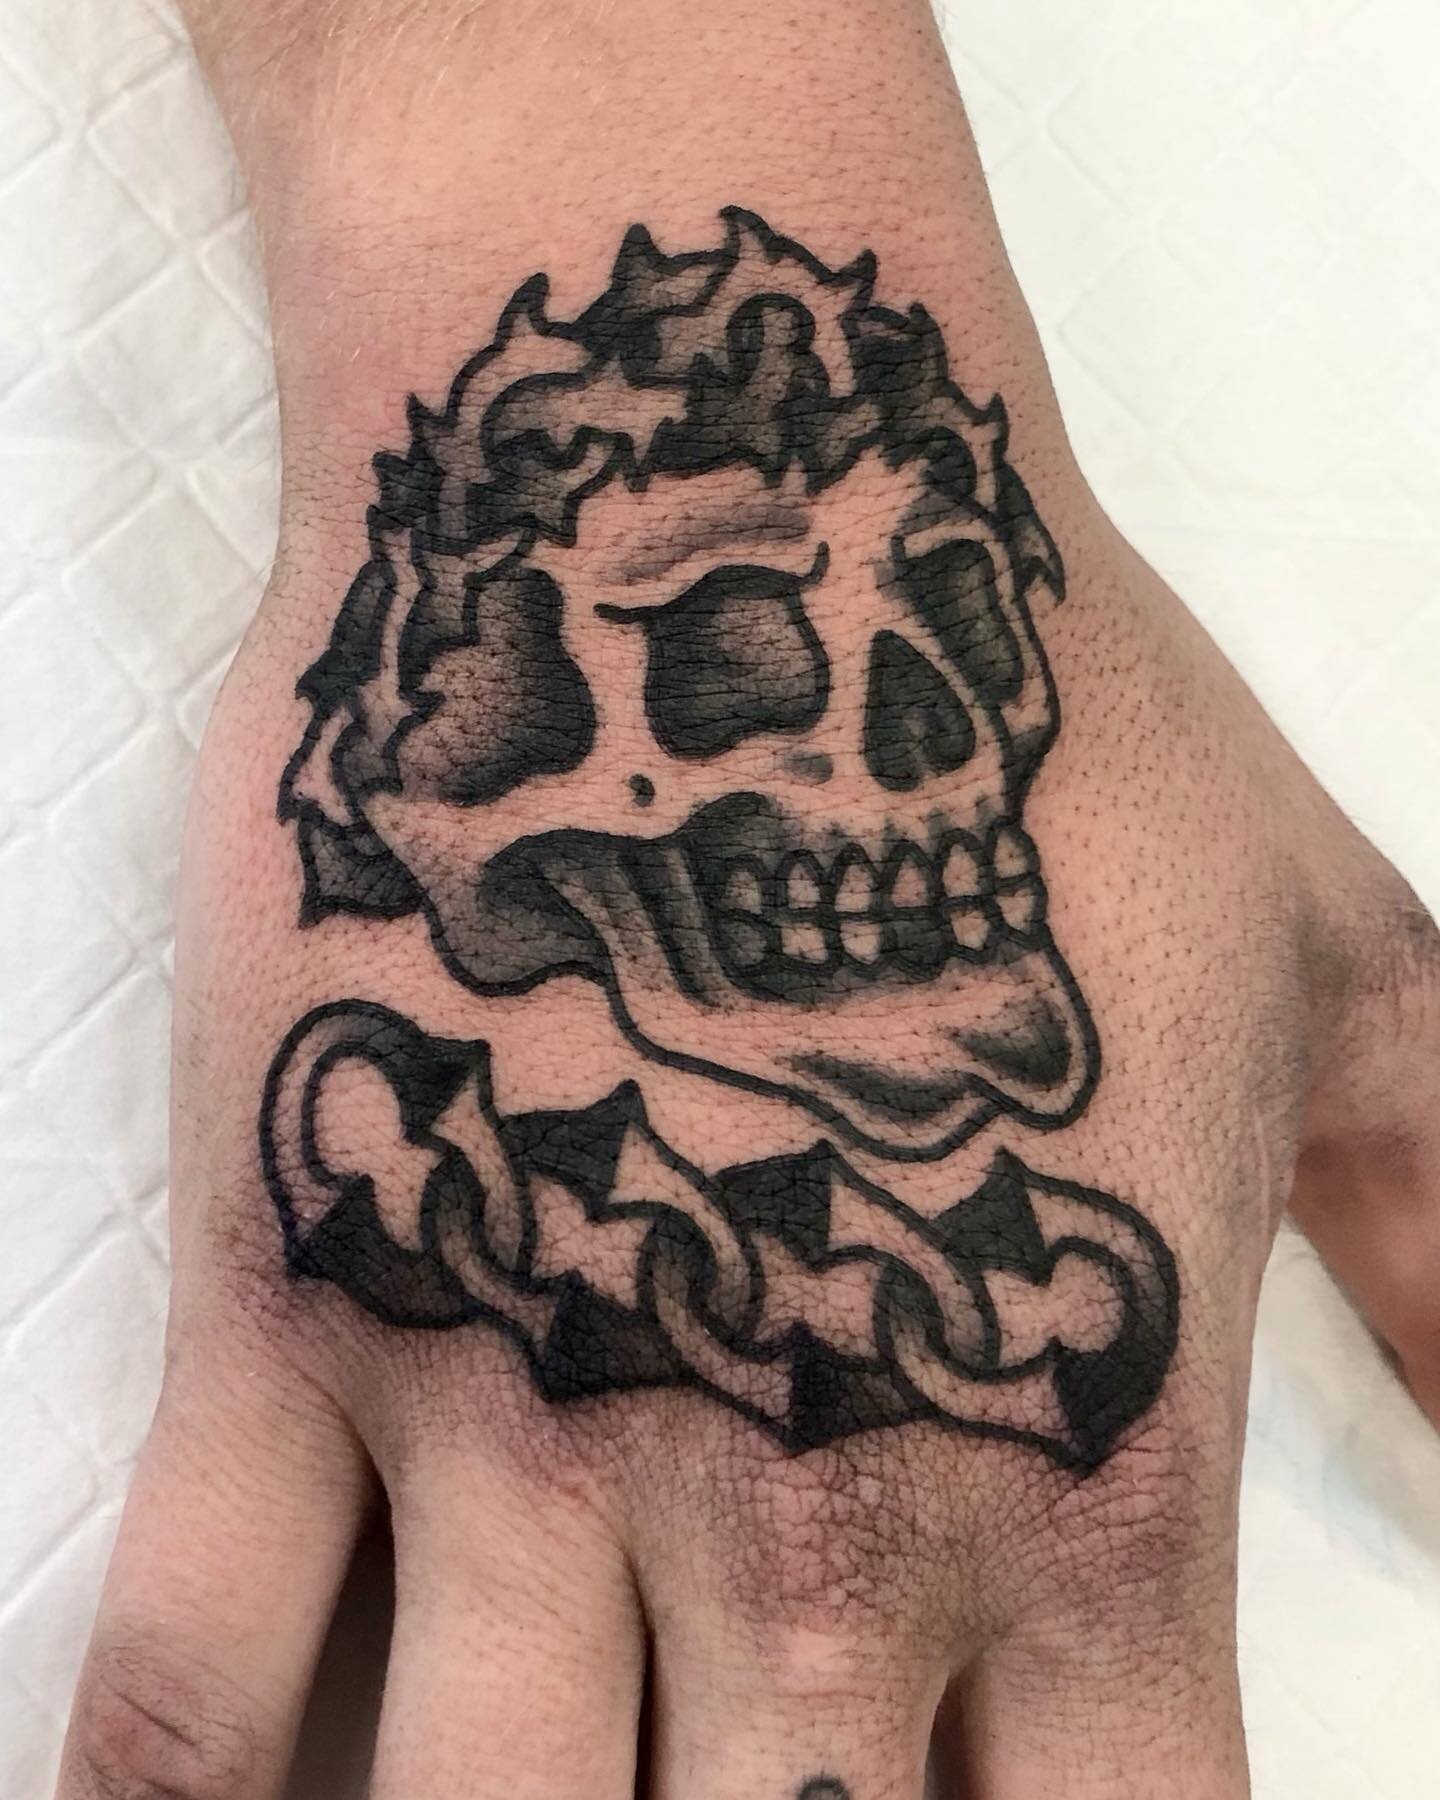 Hand tatt for Tristan, thanks mate!! Made at @wa.ink.tattoo DM for bookings time available next week ☠️